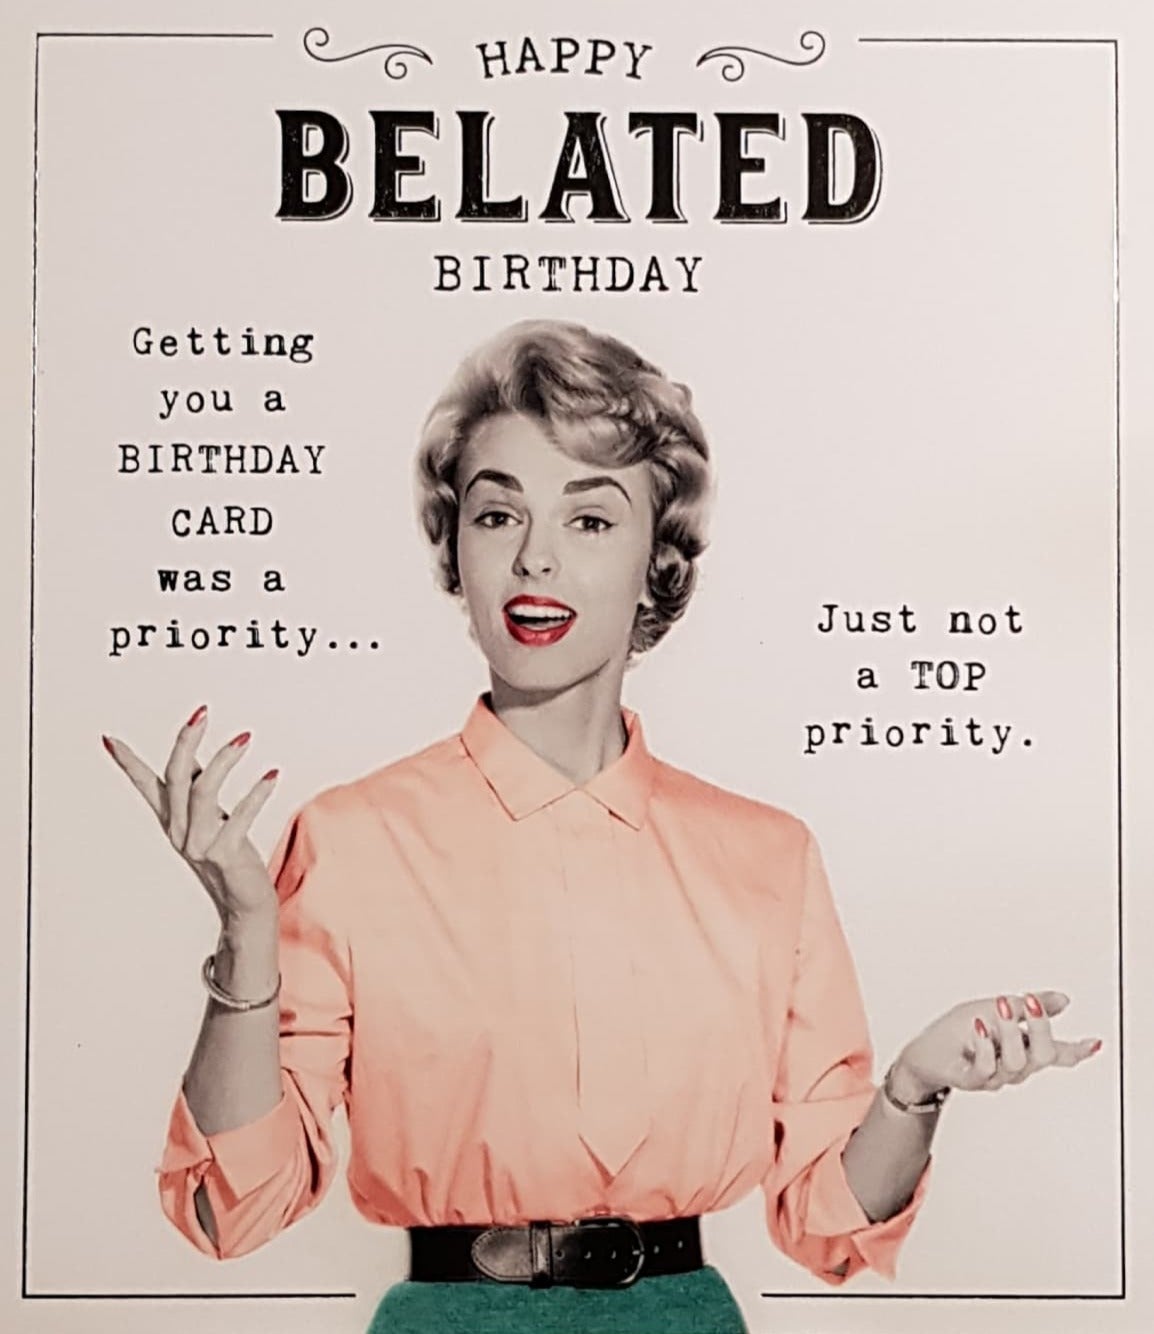 Birthday Card - Belated Birthday / Getting You A Card Was A Priority ...